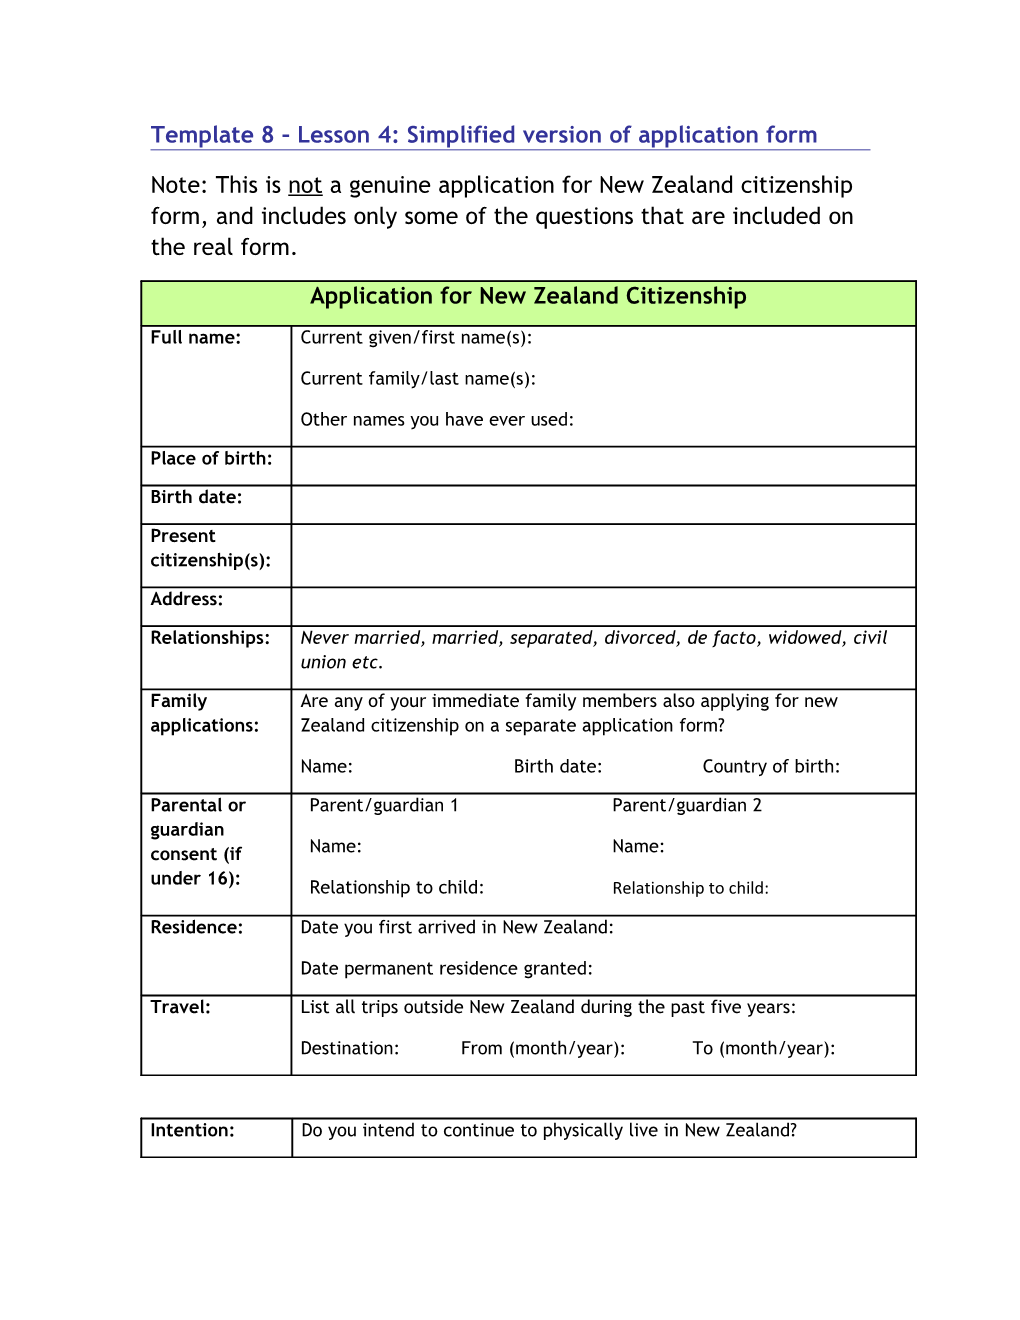 Template 7: Simplified Version of Application Form